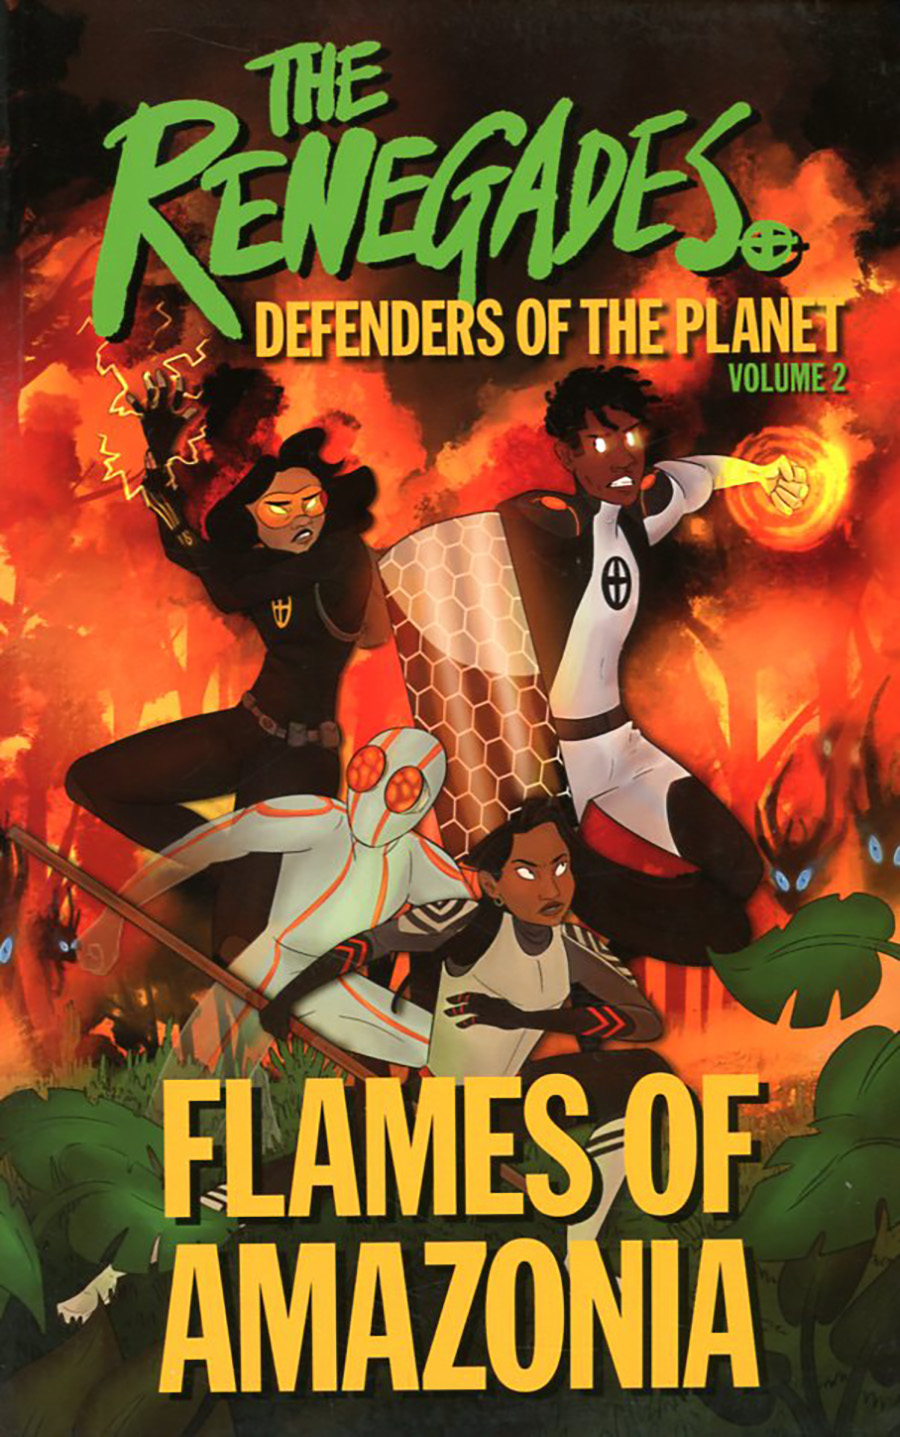 Renegades Defenders Of The Planet Vol 2 Flames Of Amazonia TP